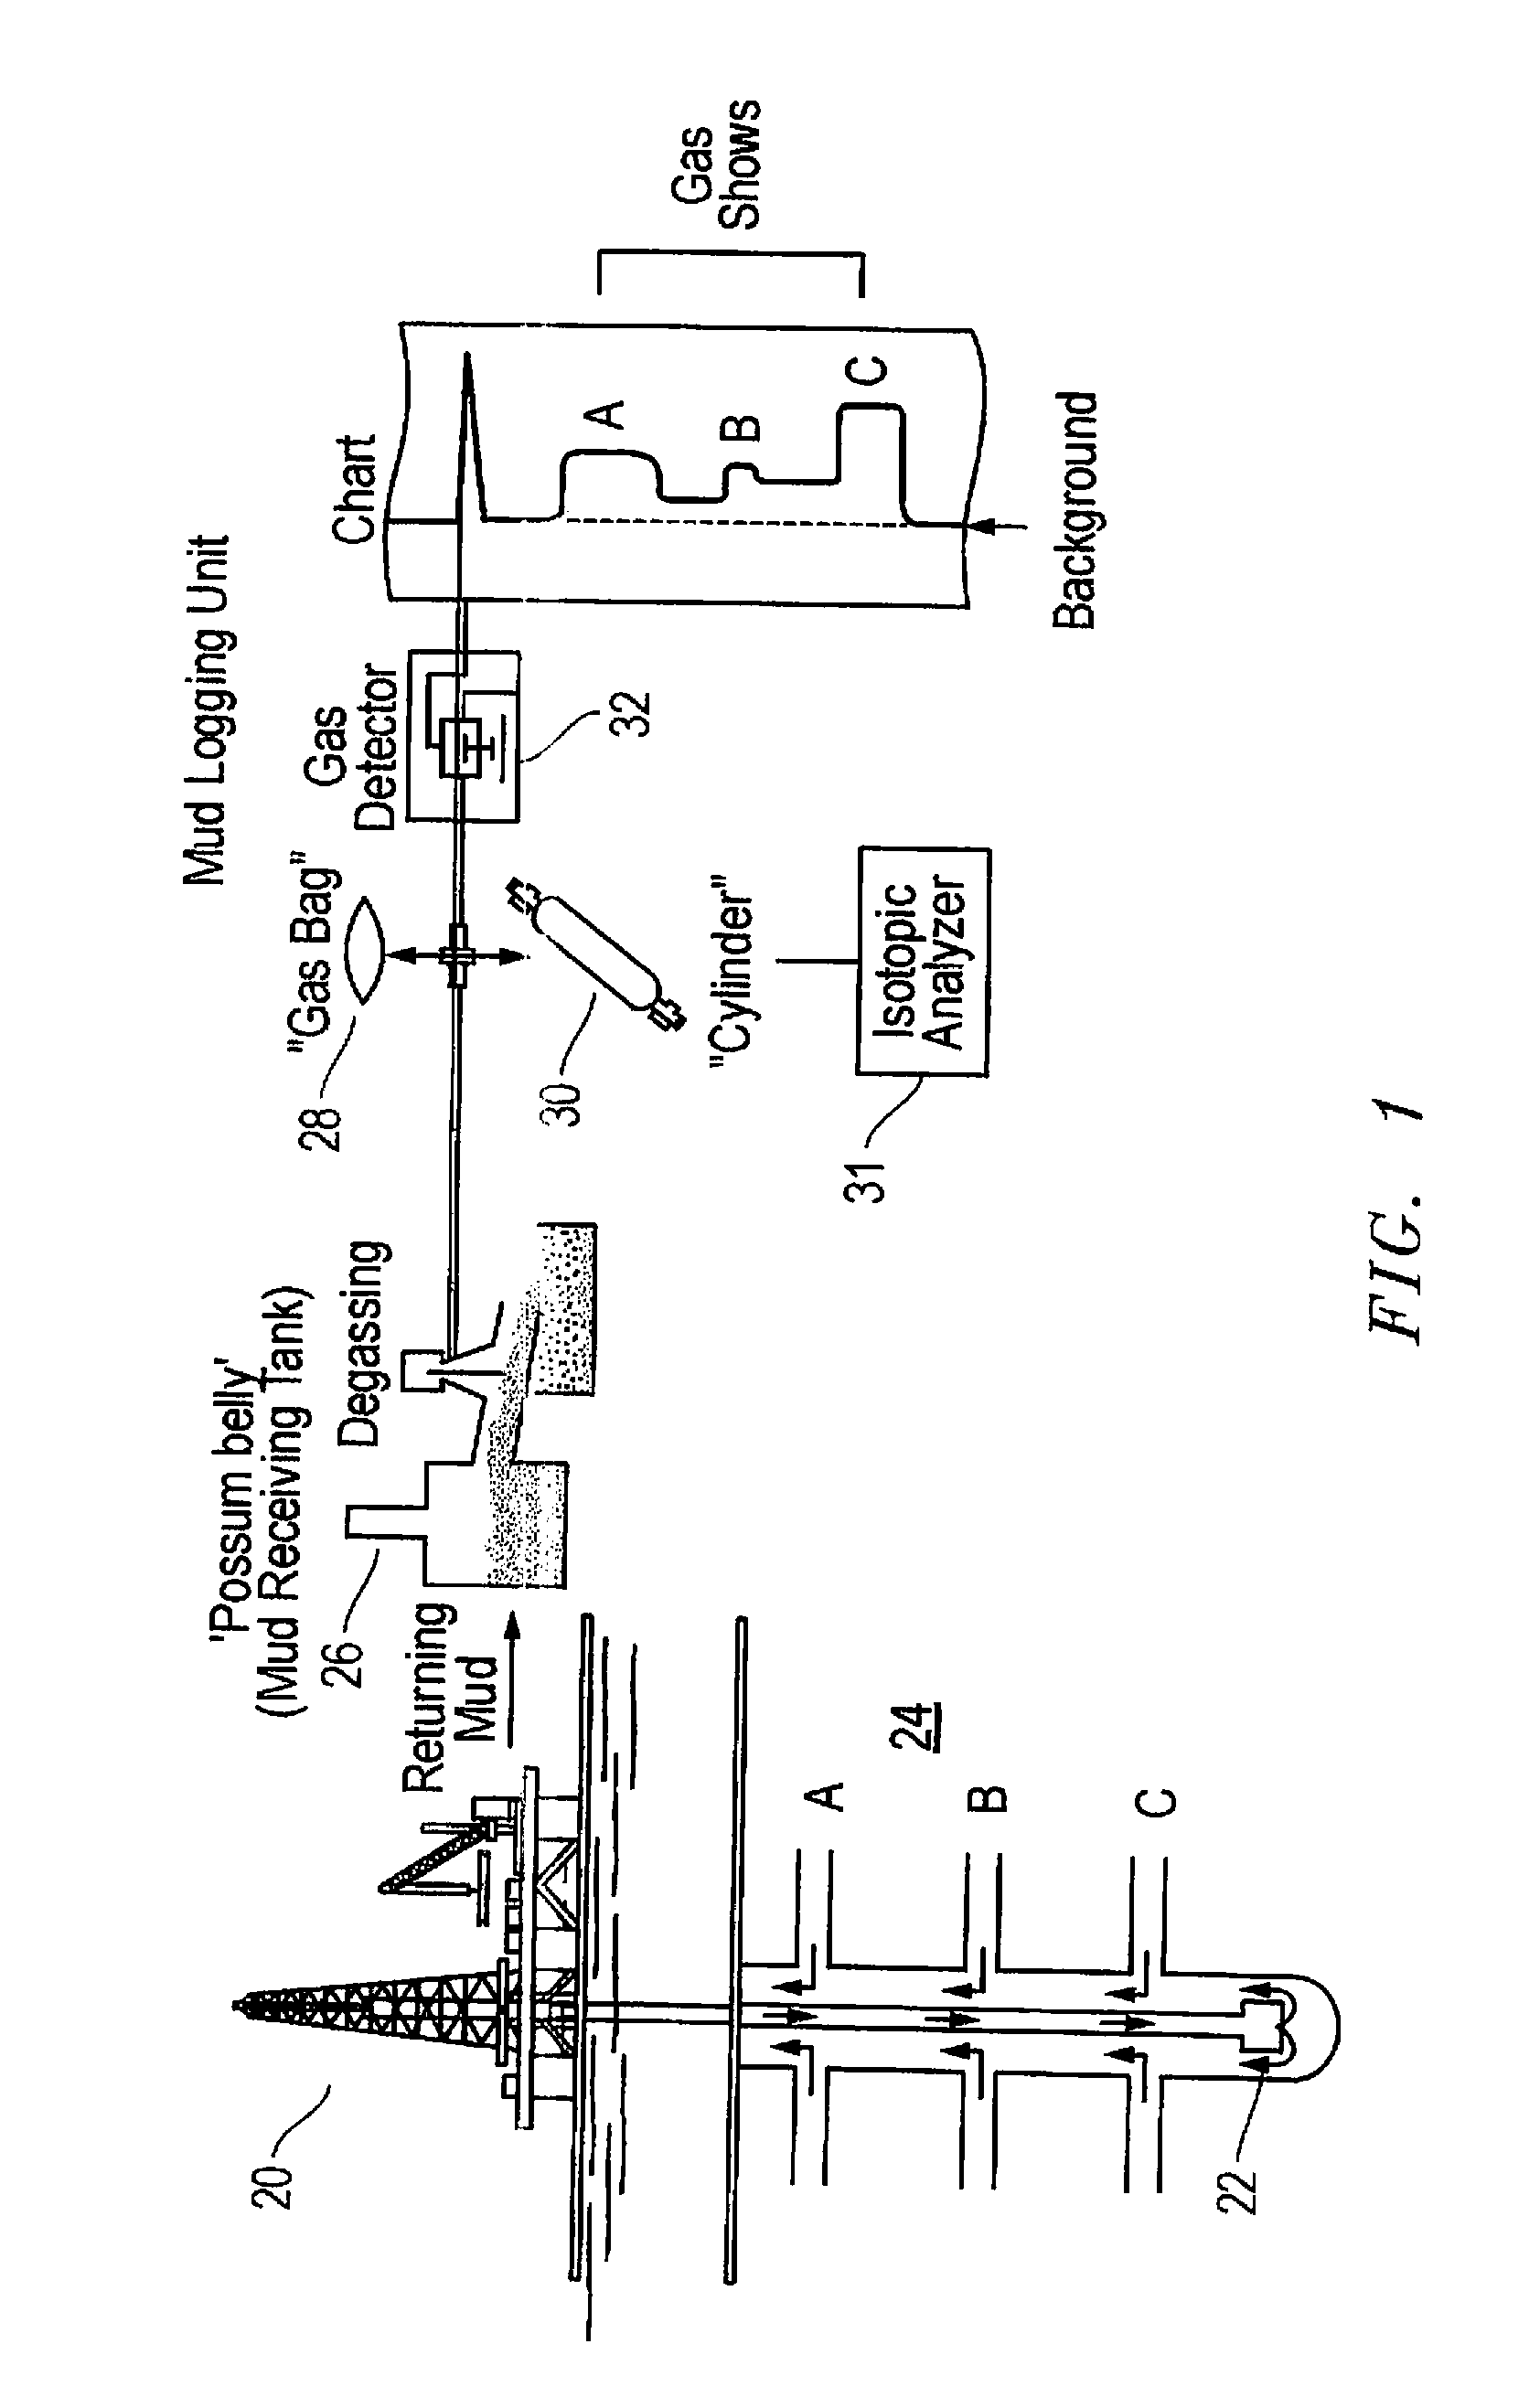 Method of integration and displaying of information derived from a mud gas isotope logging interpretative process in association with geophysical and other logs from oil and gas drilling operations